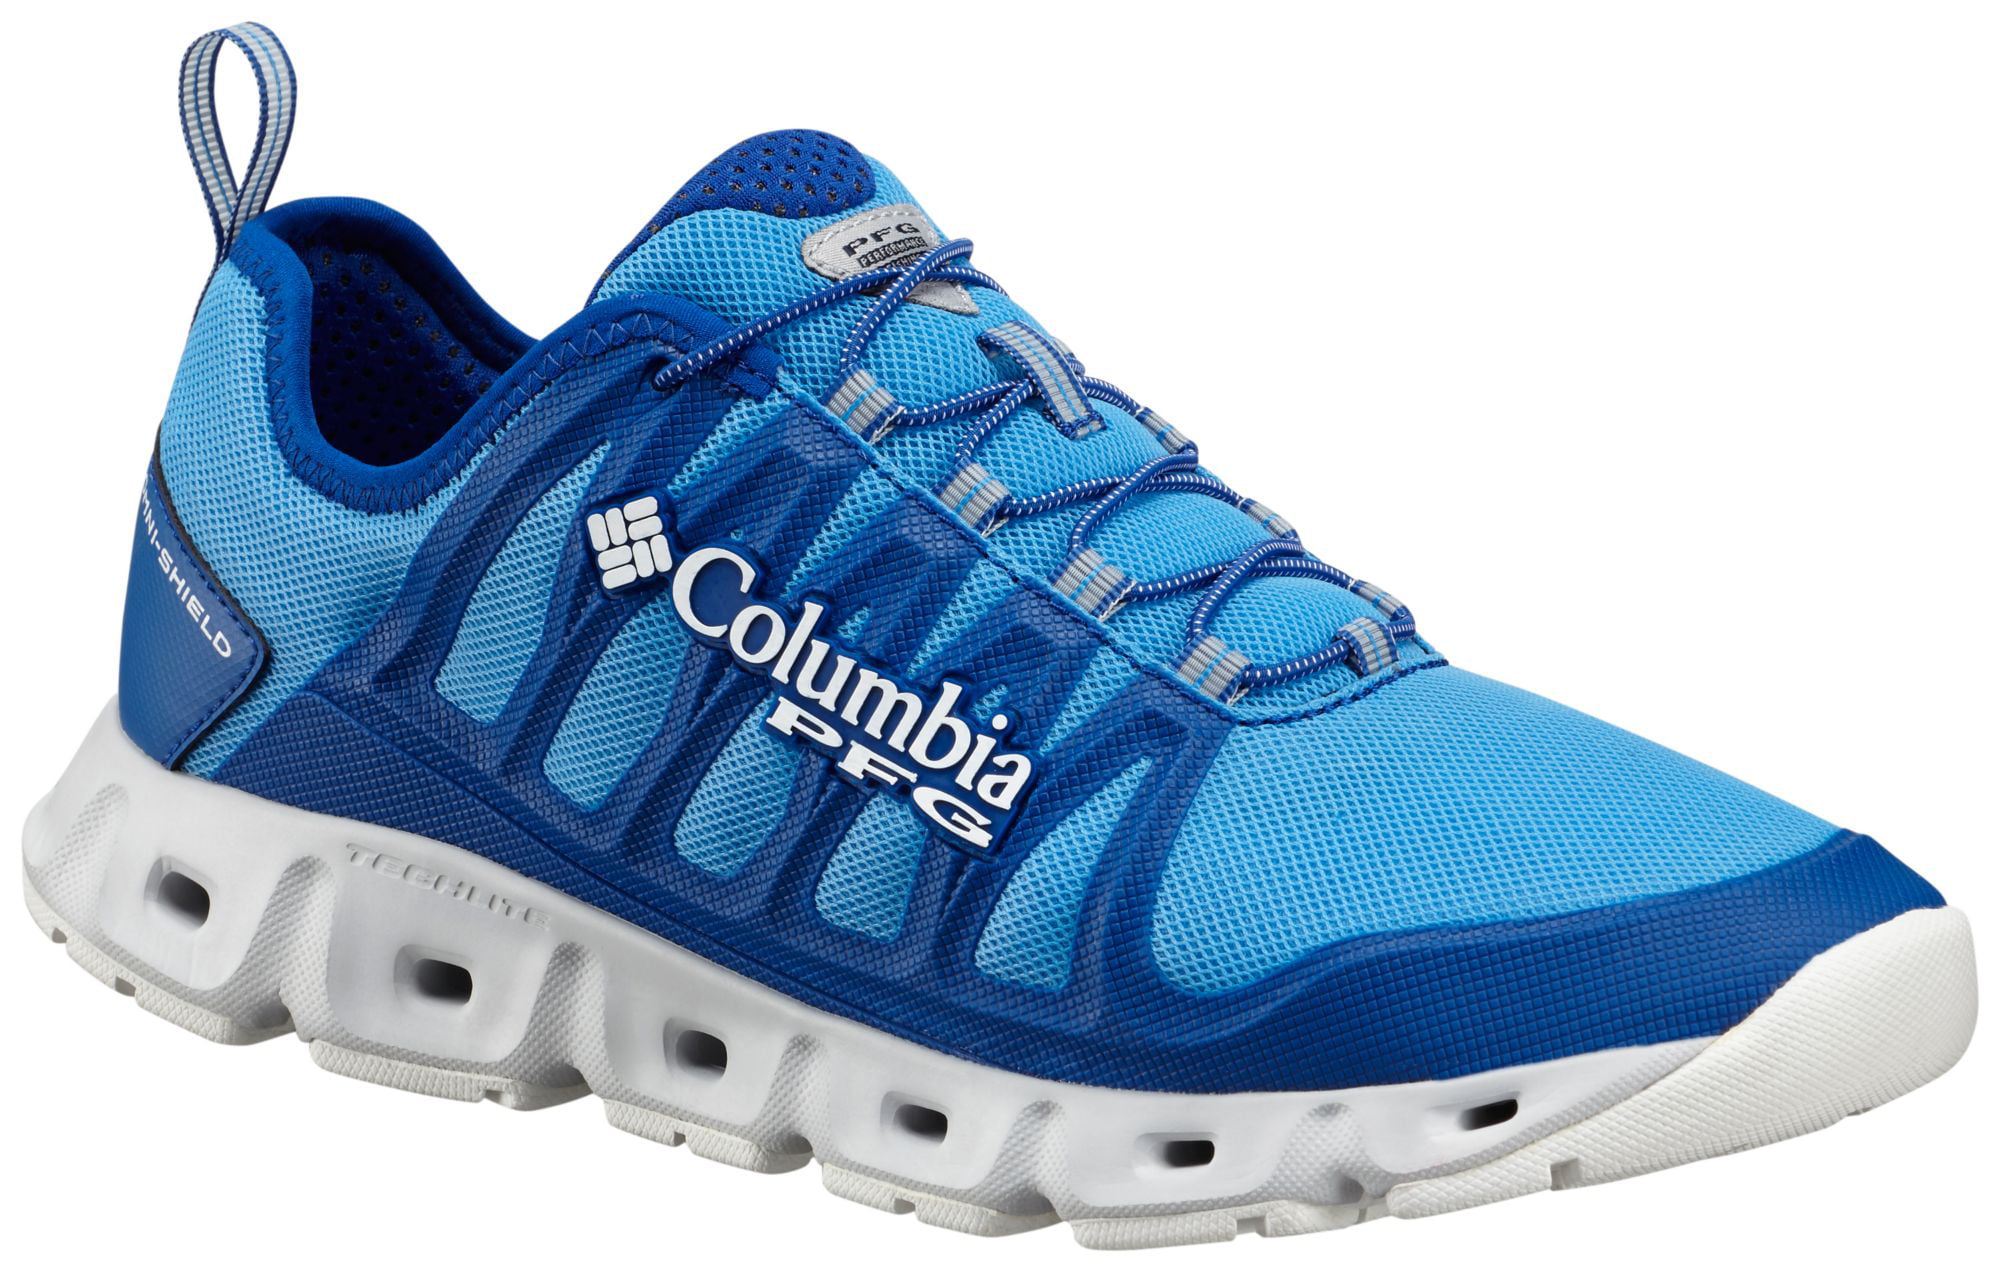 37 White Columbia headwall shoes review for Mens